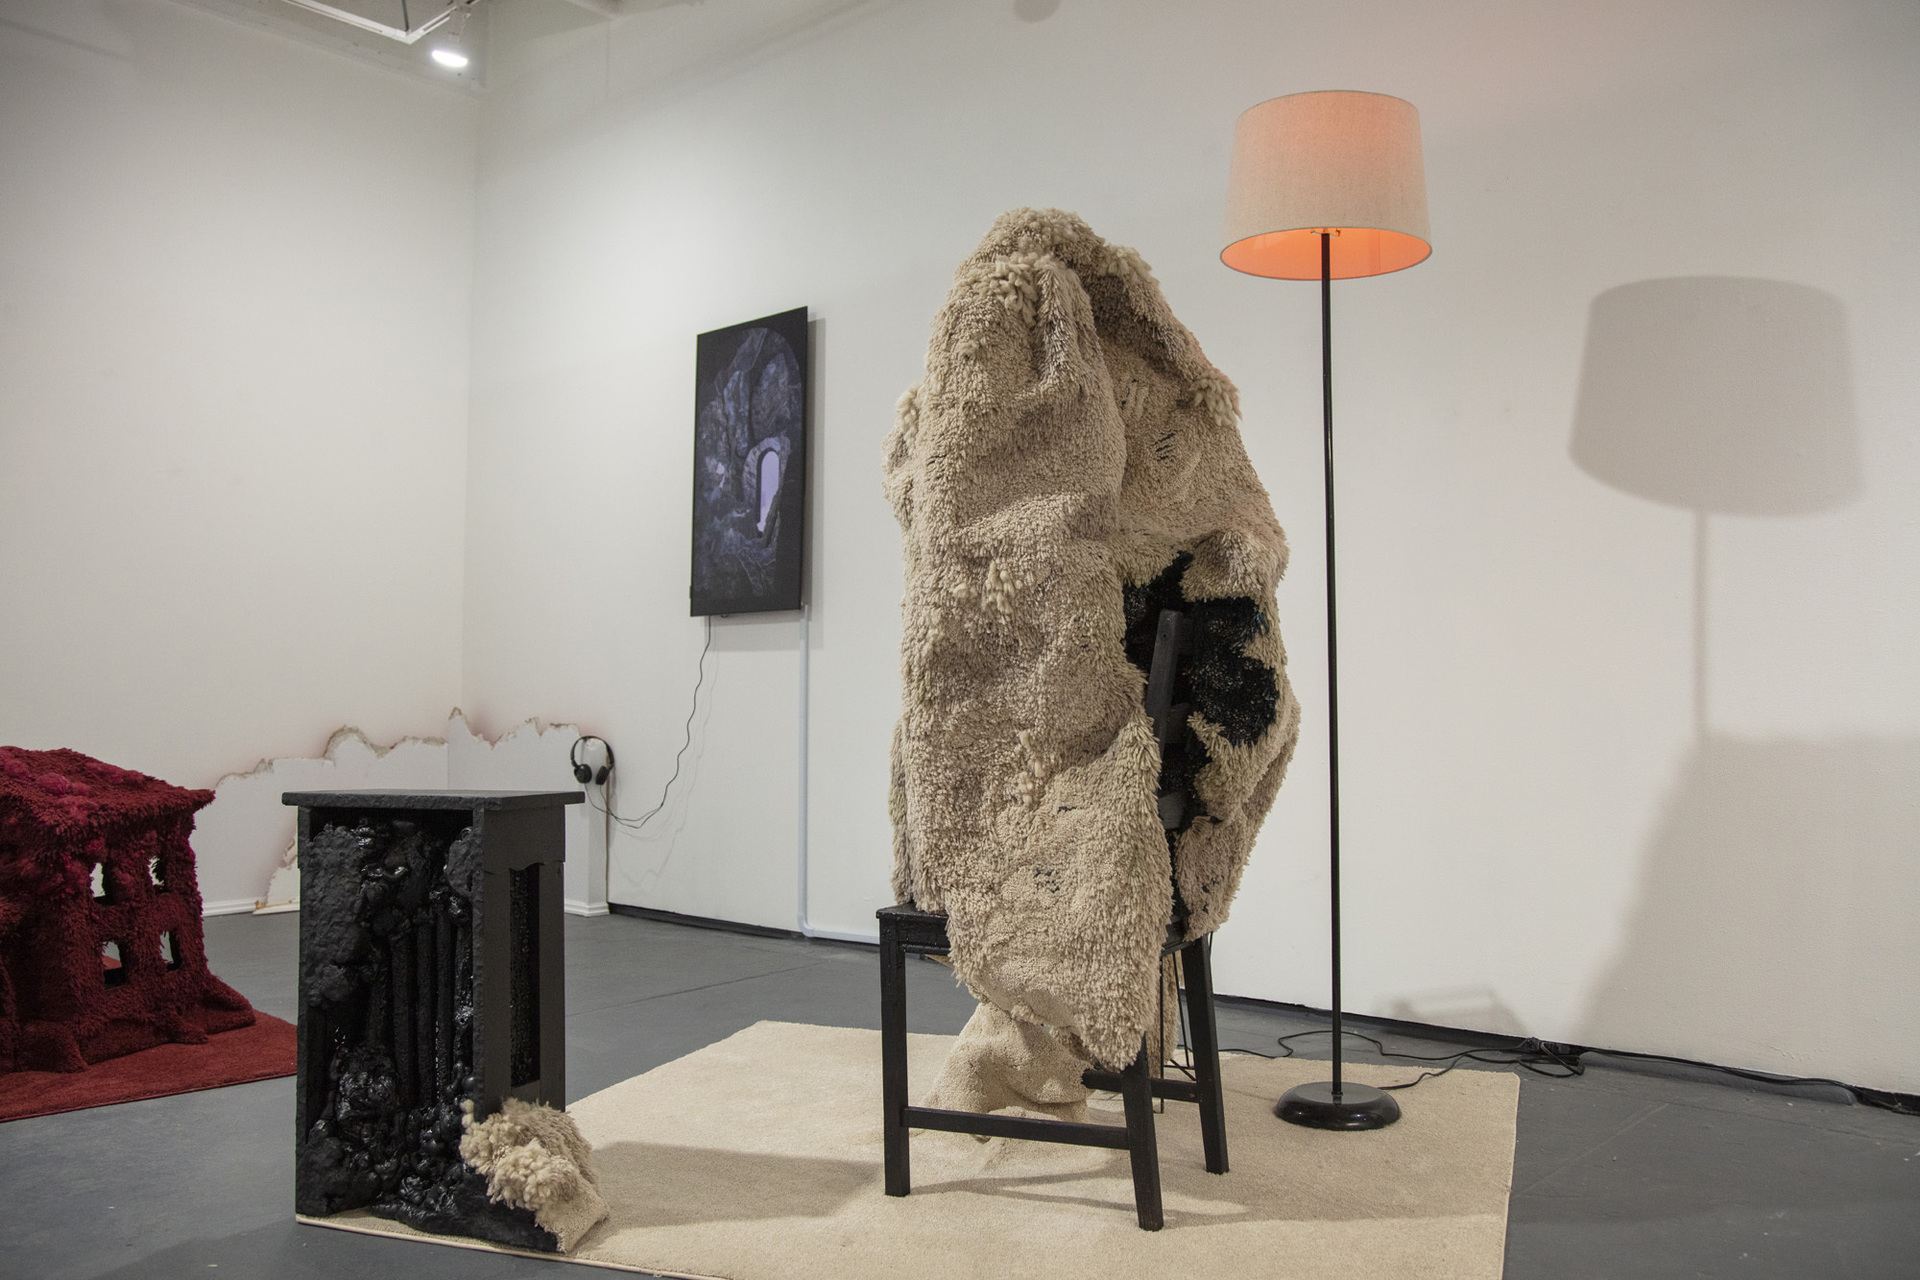 Kate Stone, The Soft Tectonics of Fevered Bodies, 2022, Carpet, found furniture, wool, 40hz bulb, single-channel animation, cell phone, plaster, wax, epoxy clay, polyurethane foam, flex paste, wire, wood, acrylic paint, 5'8" x 4'10" x 5'2"